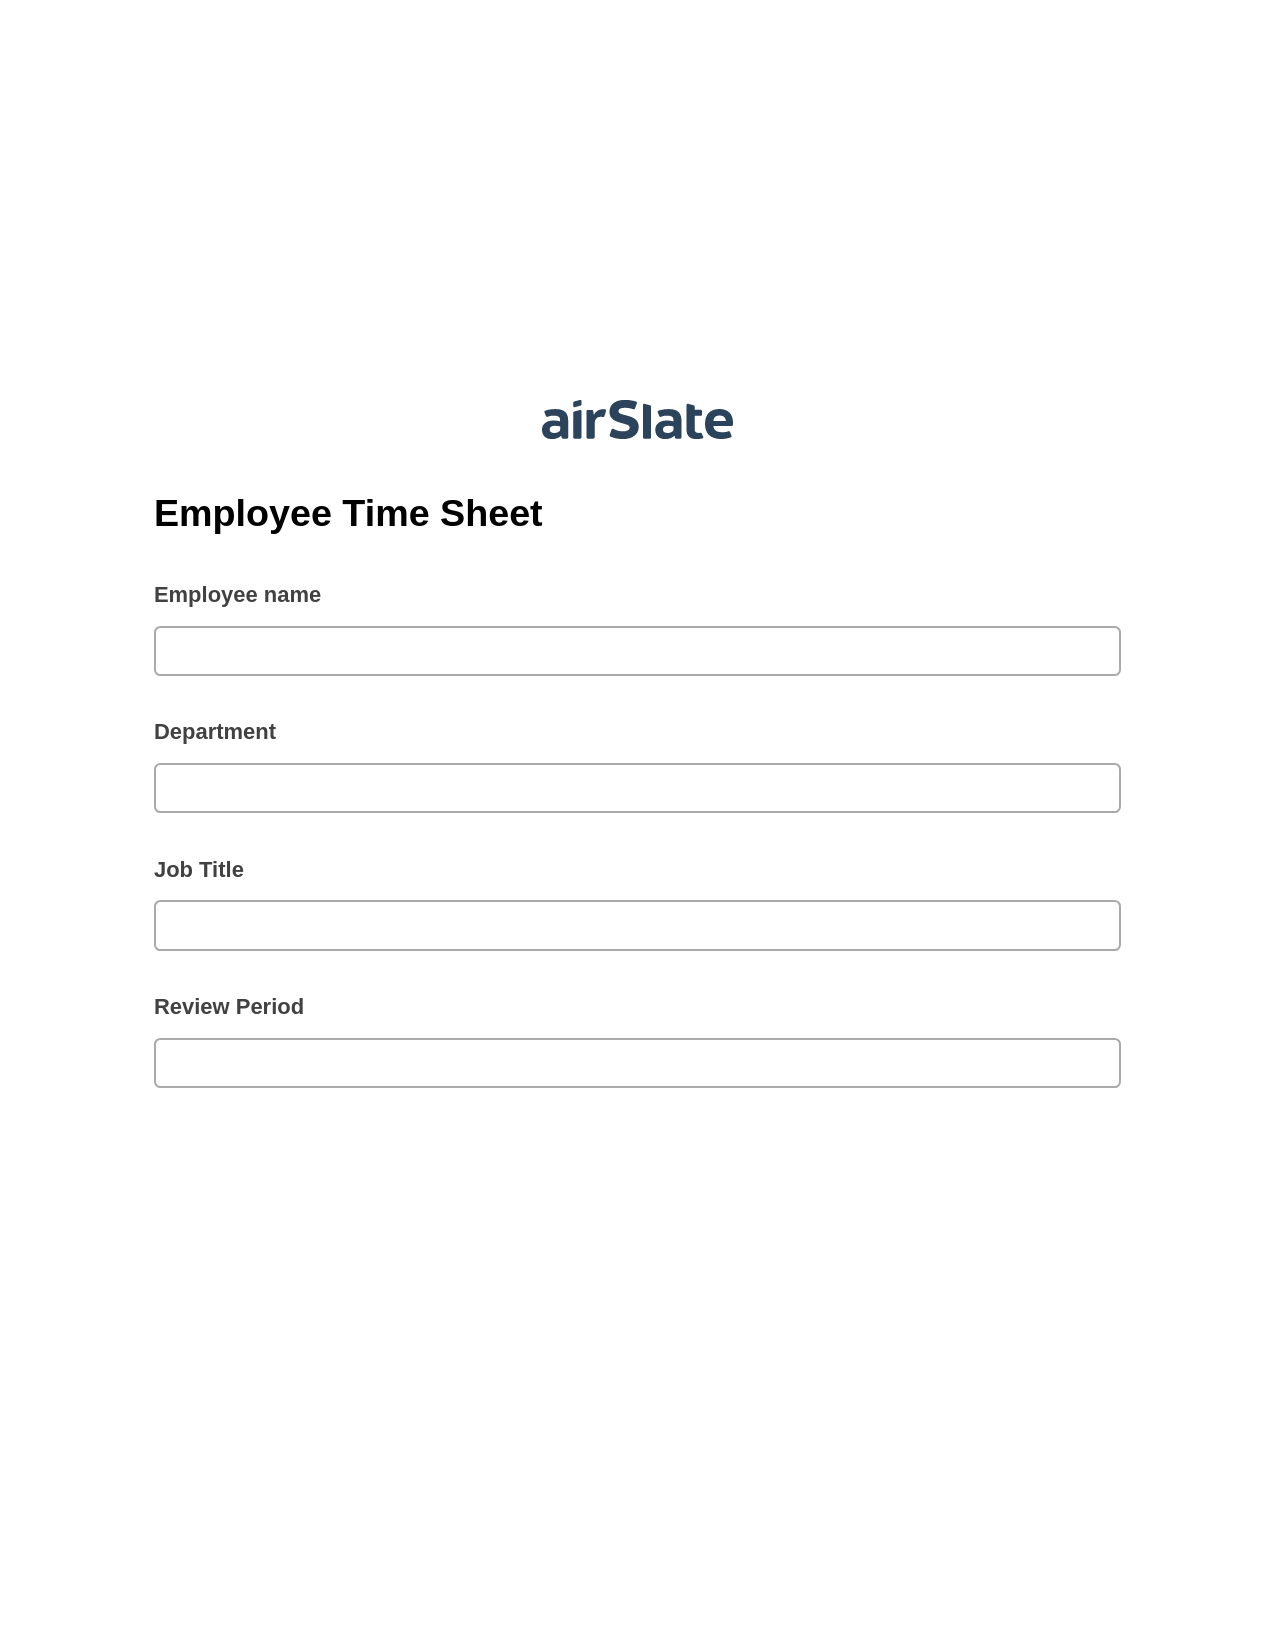 Employee Time Sheet Pre-fill from MySQL Bot, Update Audit Trail Bot, Archive to Google Drive Bot